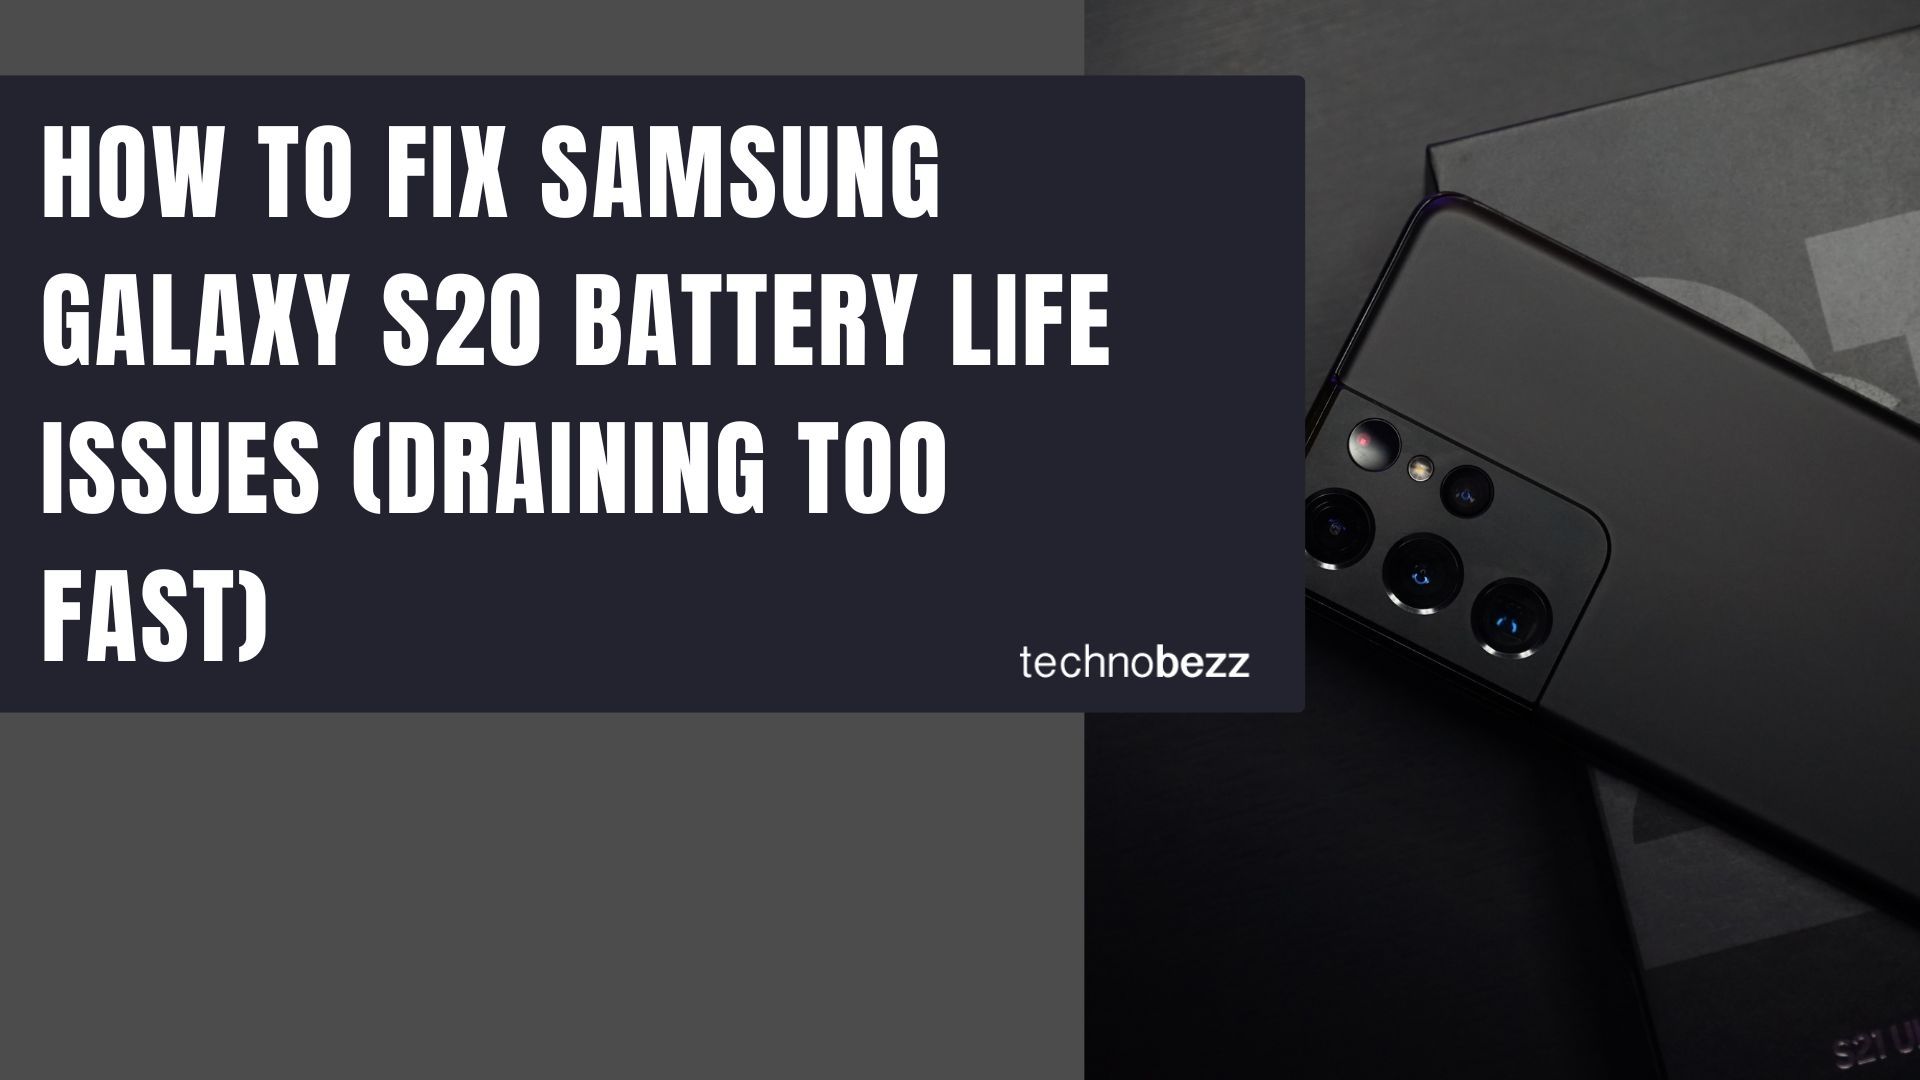 To Fix Samsung Battery Life Issues (Draining Fast)